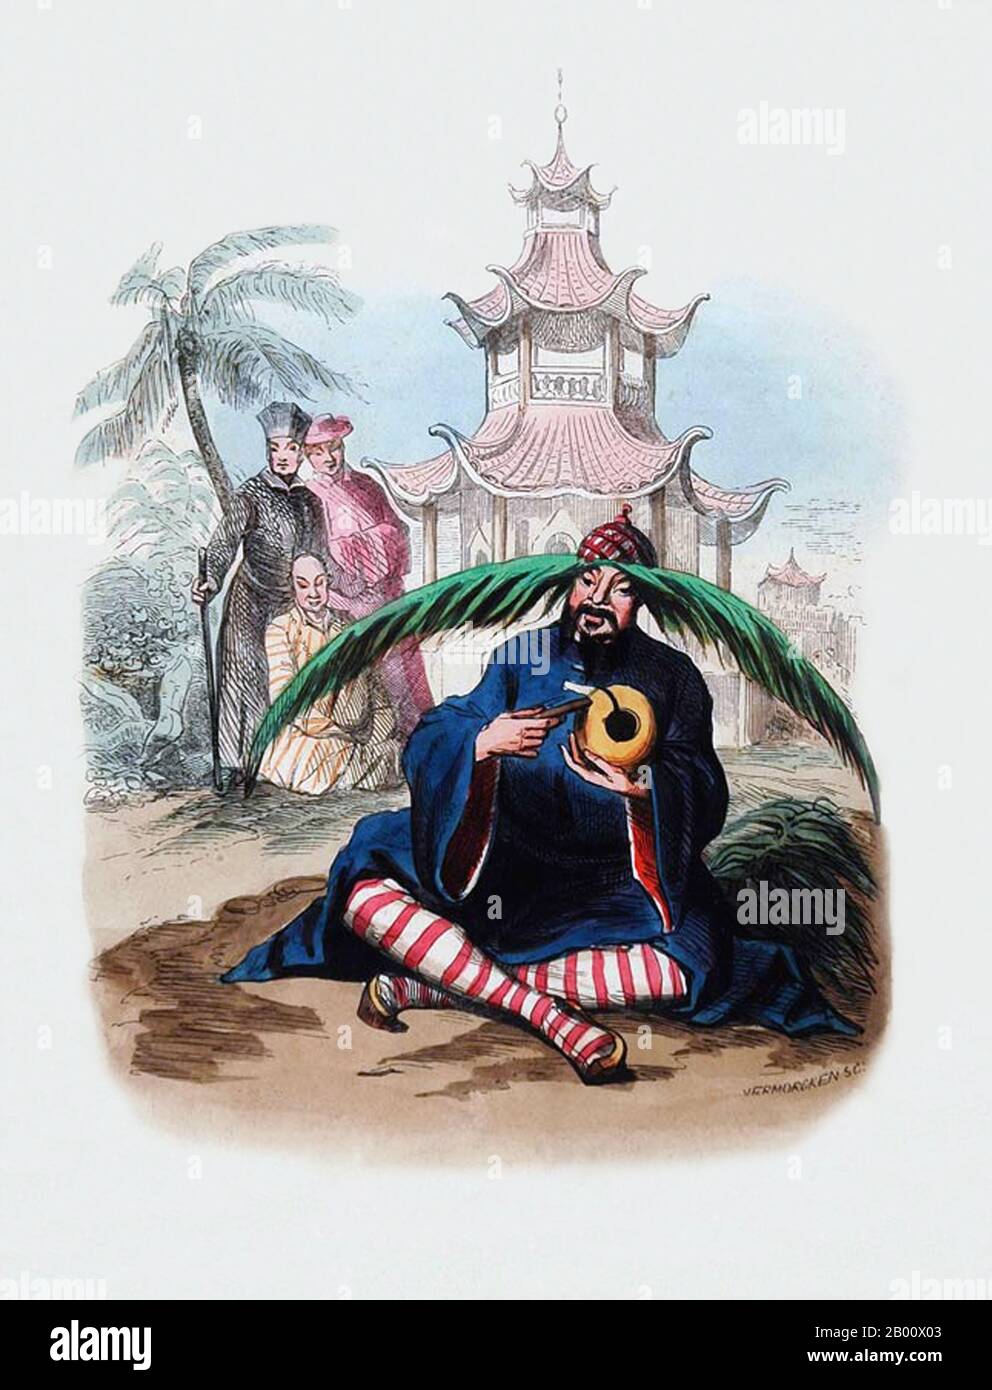 China/Belgium: 'Chinese Monks/Bonzes Chinois'. Hand-coloured engraving by Auguste Wahlen (1785-1849), 1843.  A hand-coloured engraving from Auguste Wahlen's 'Moeurs, Usages, et Costumes de tous les Peuples de Monde, d'apres des Documents Authentiques et les Voyages les plus Recents' (Manners, Customs and Costumes of all the Peoples of the World taken from Authentic Documents and the Most Recent Travels). Stock Photo